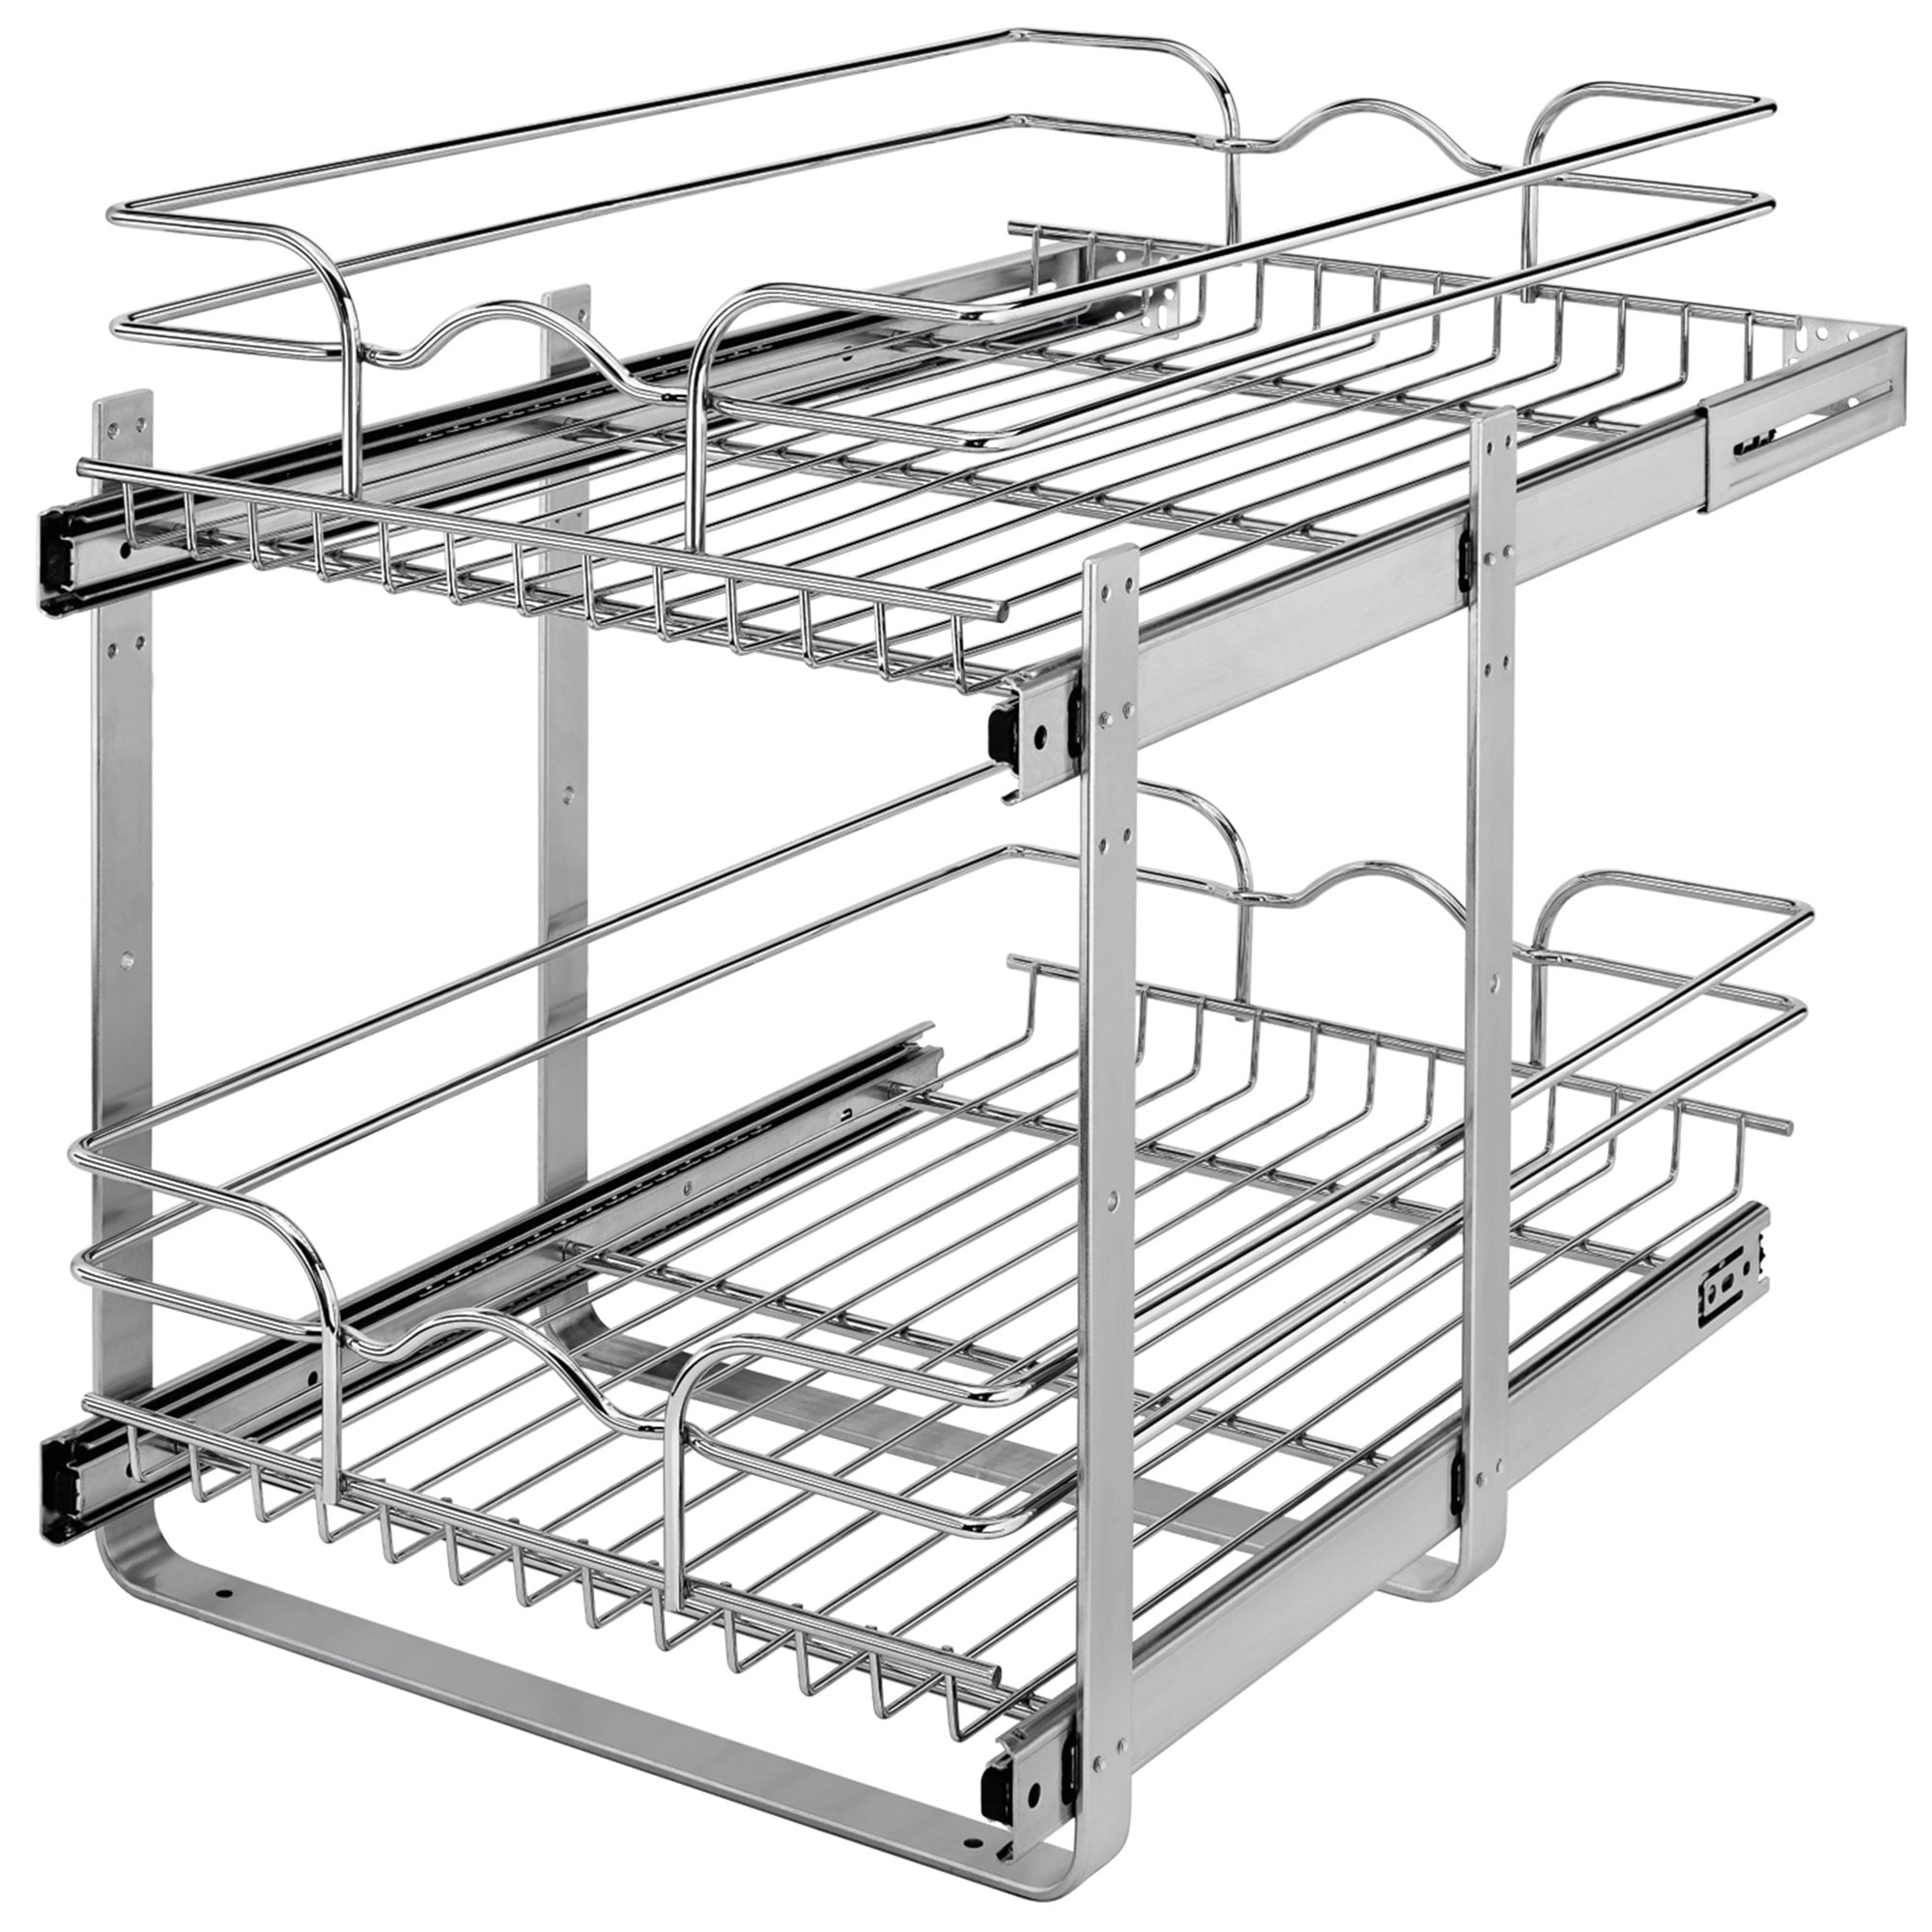 11 in. H x 15 in. W x 18 in. D Adjustable Steel Shelf with Basket Cabinet Organizer in Chrome